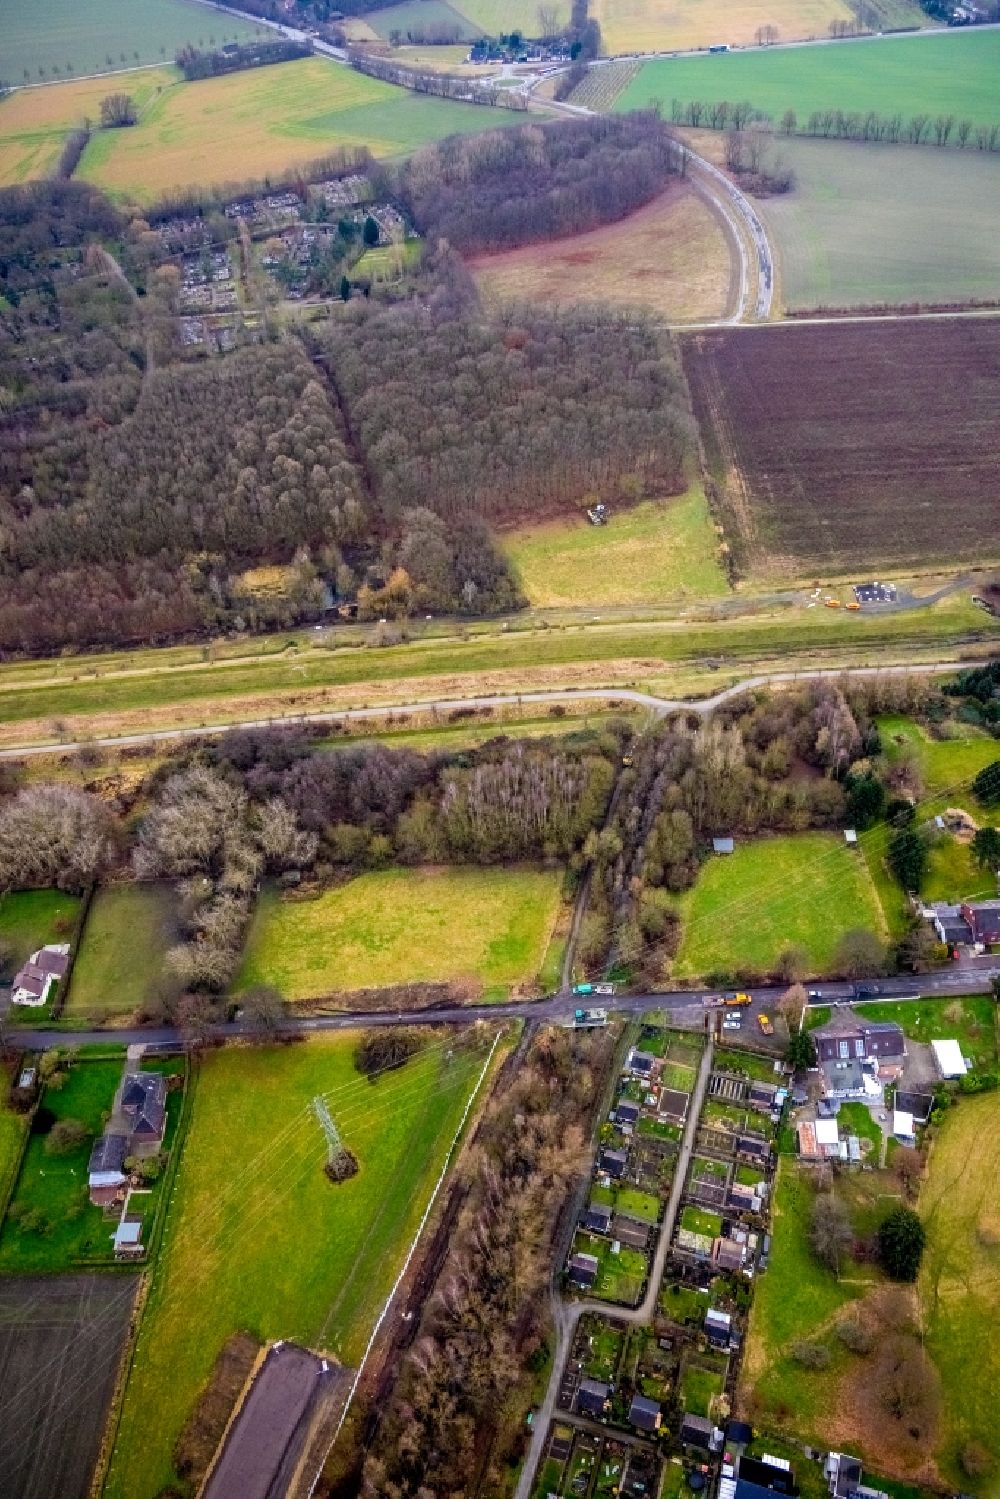 Aerial image Bergkamen - Construction of the bypass road in the course of the L821n between Erich-Ollenhauer-Strasse and Luenener Strasse in Bergkamen in the state North Rhine-Westphalia, Germany